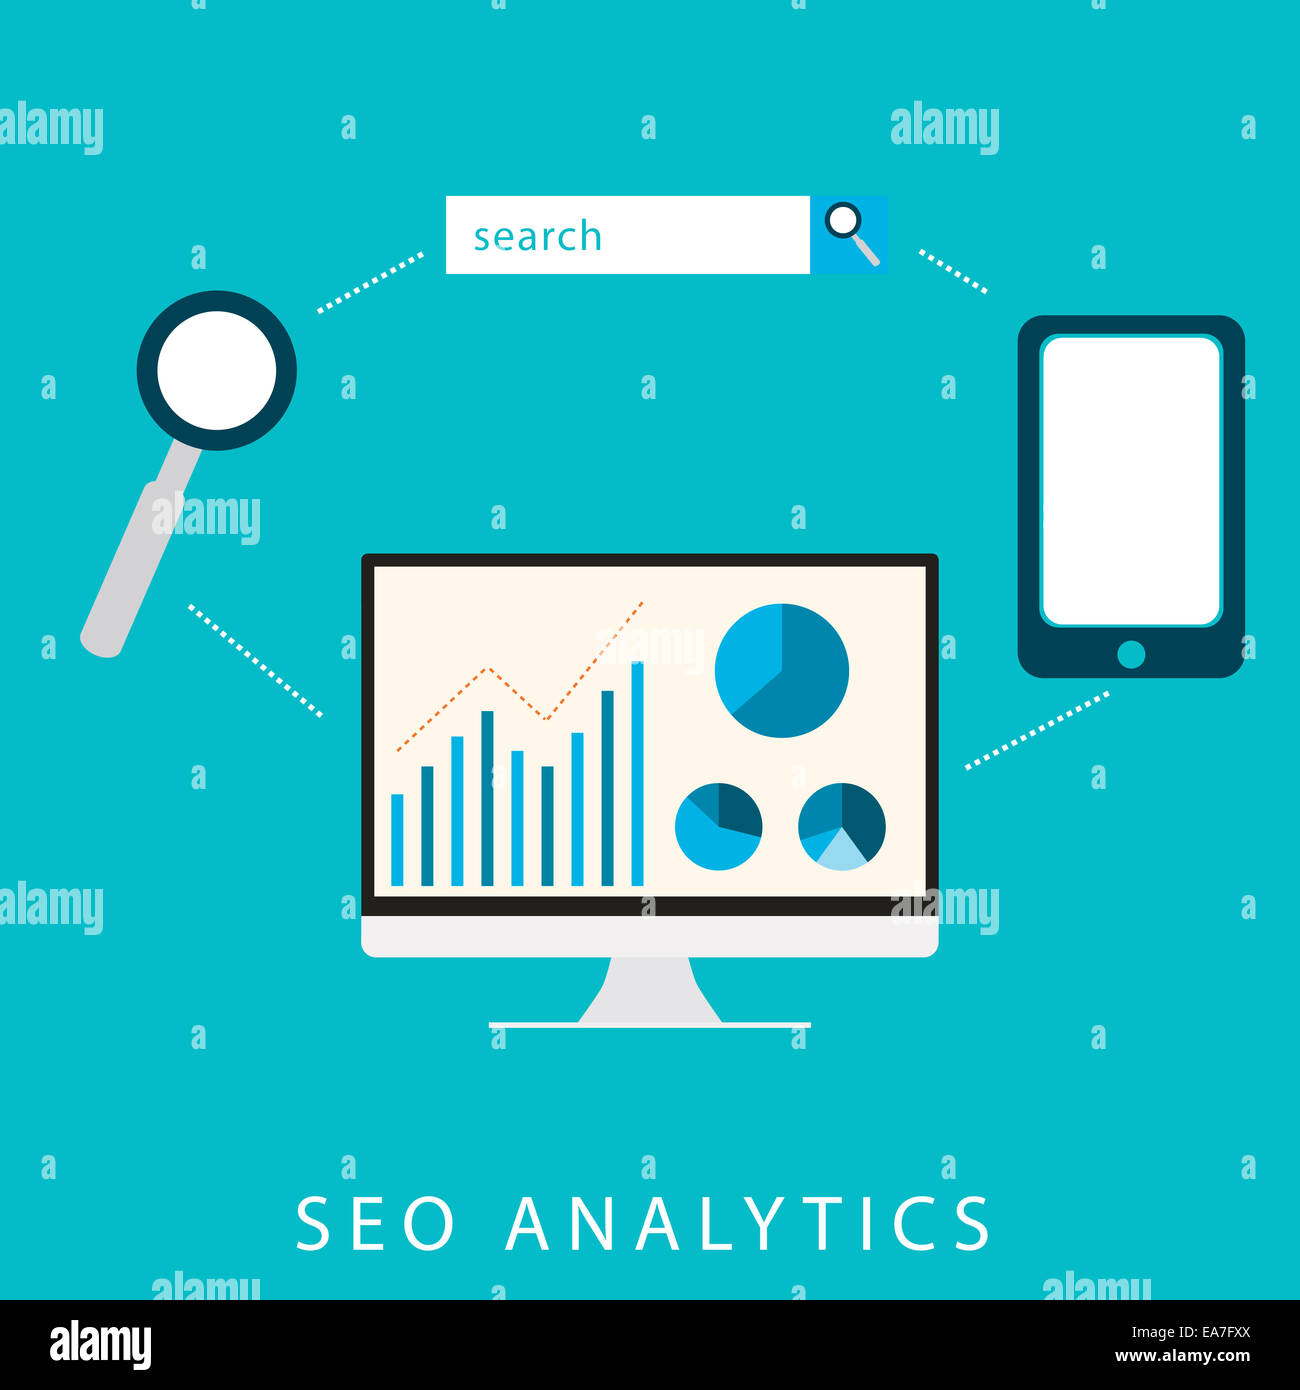 SEO analytics flat graphic design for search engine optimization concept in vector Stock Photo